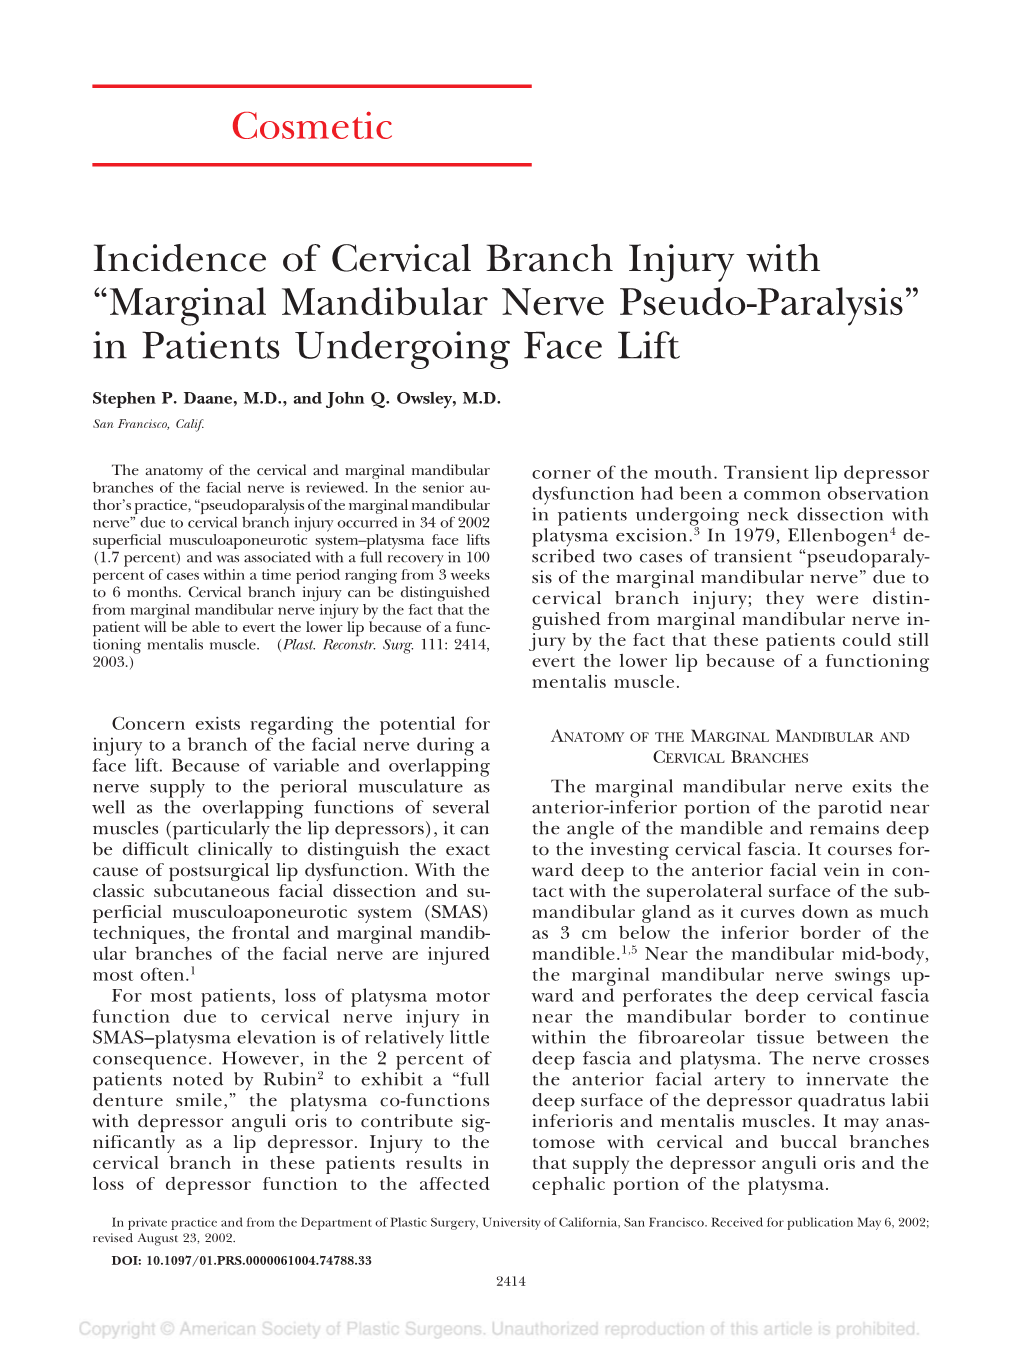 Cosmetic Incidence of Cervical Branch Injury with “Marginal Mandibular Nerve Pseudo-Paralysis” in Patients Undergoing Face L